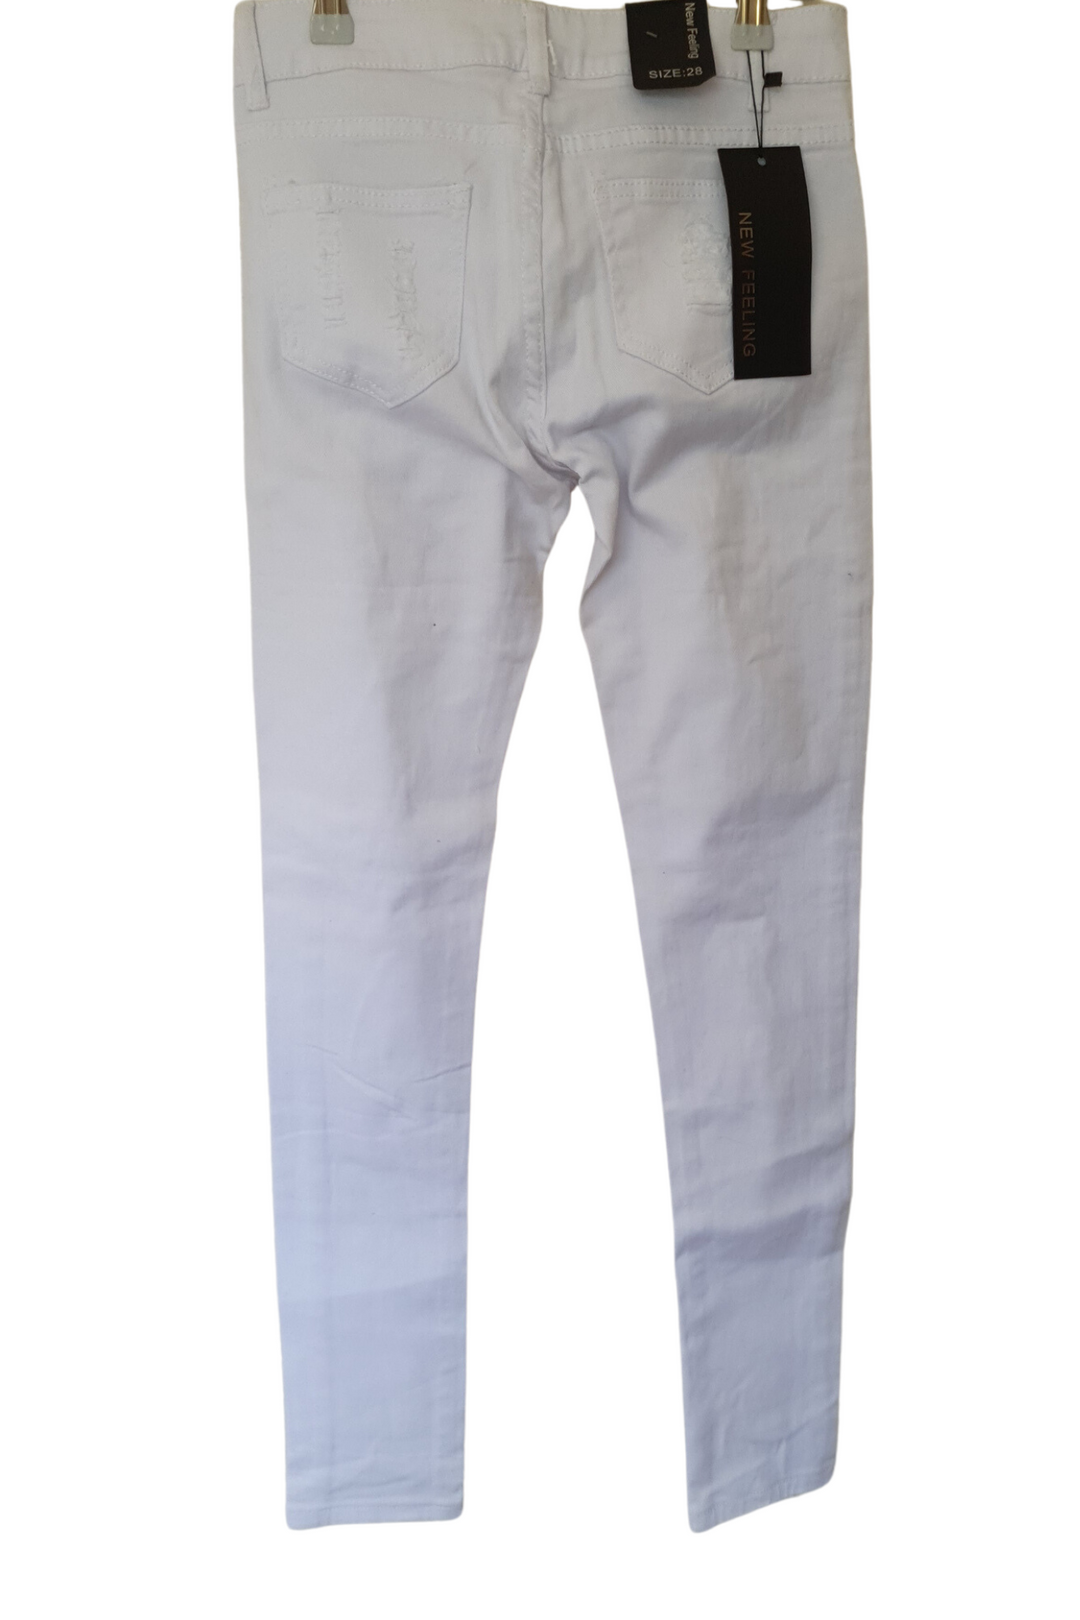 White Jeans with Ripple Style on Legs - Bronze Button